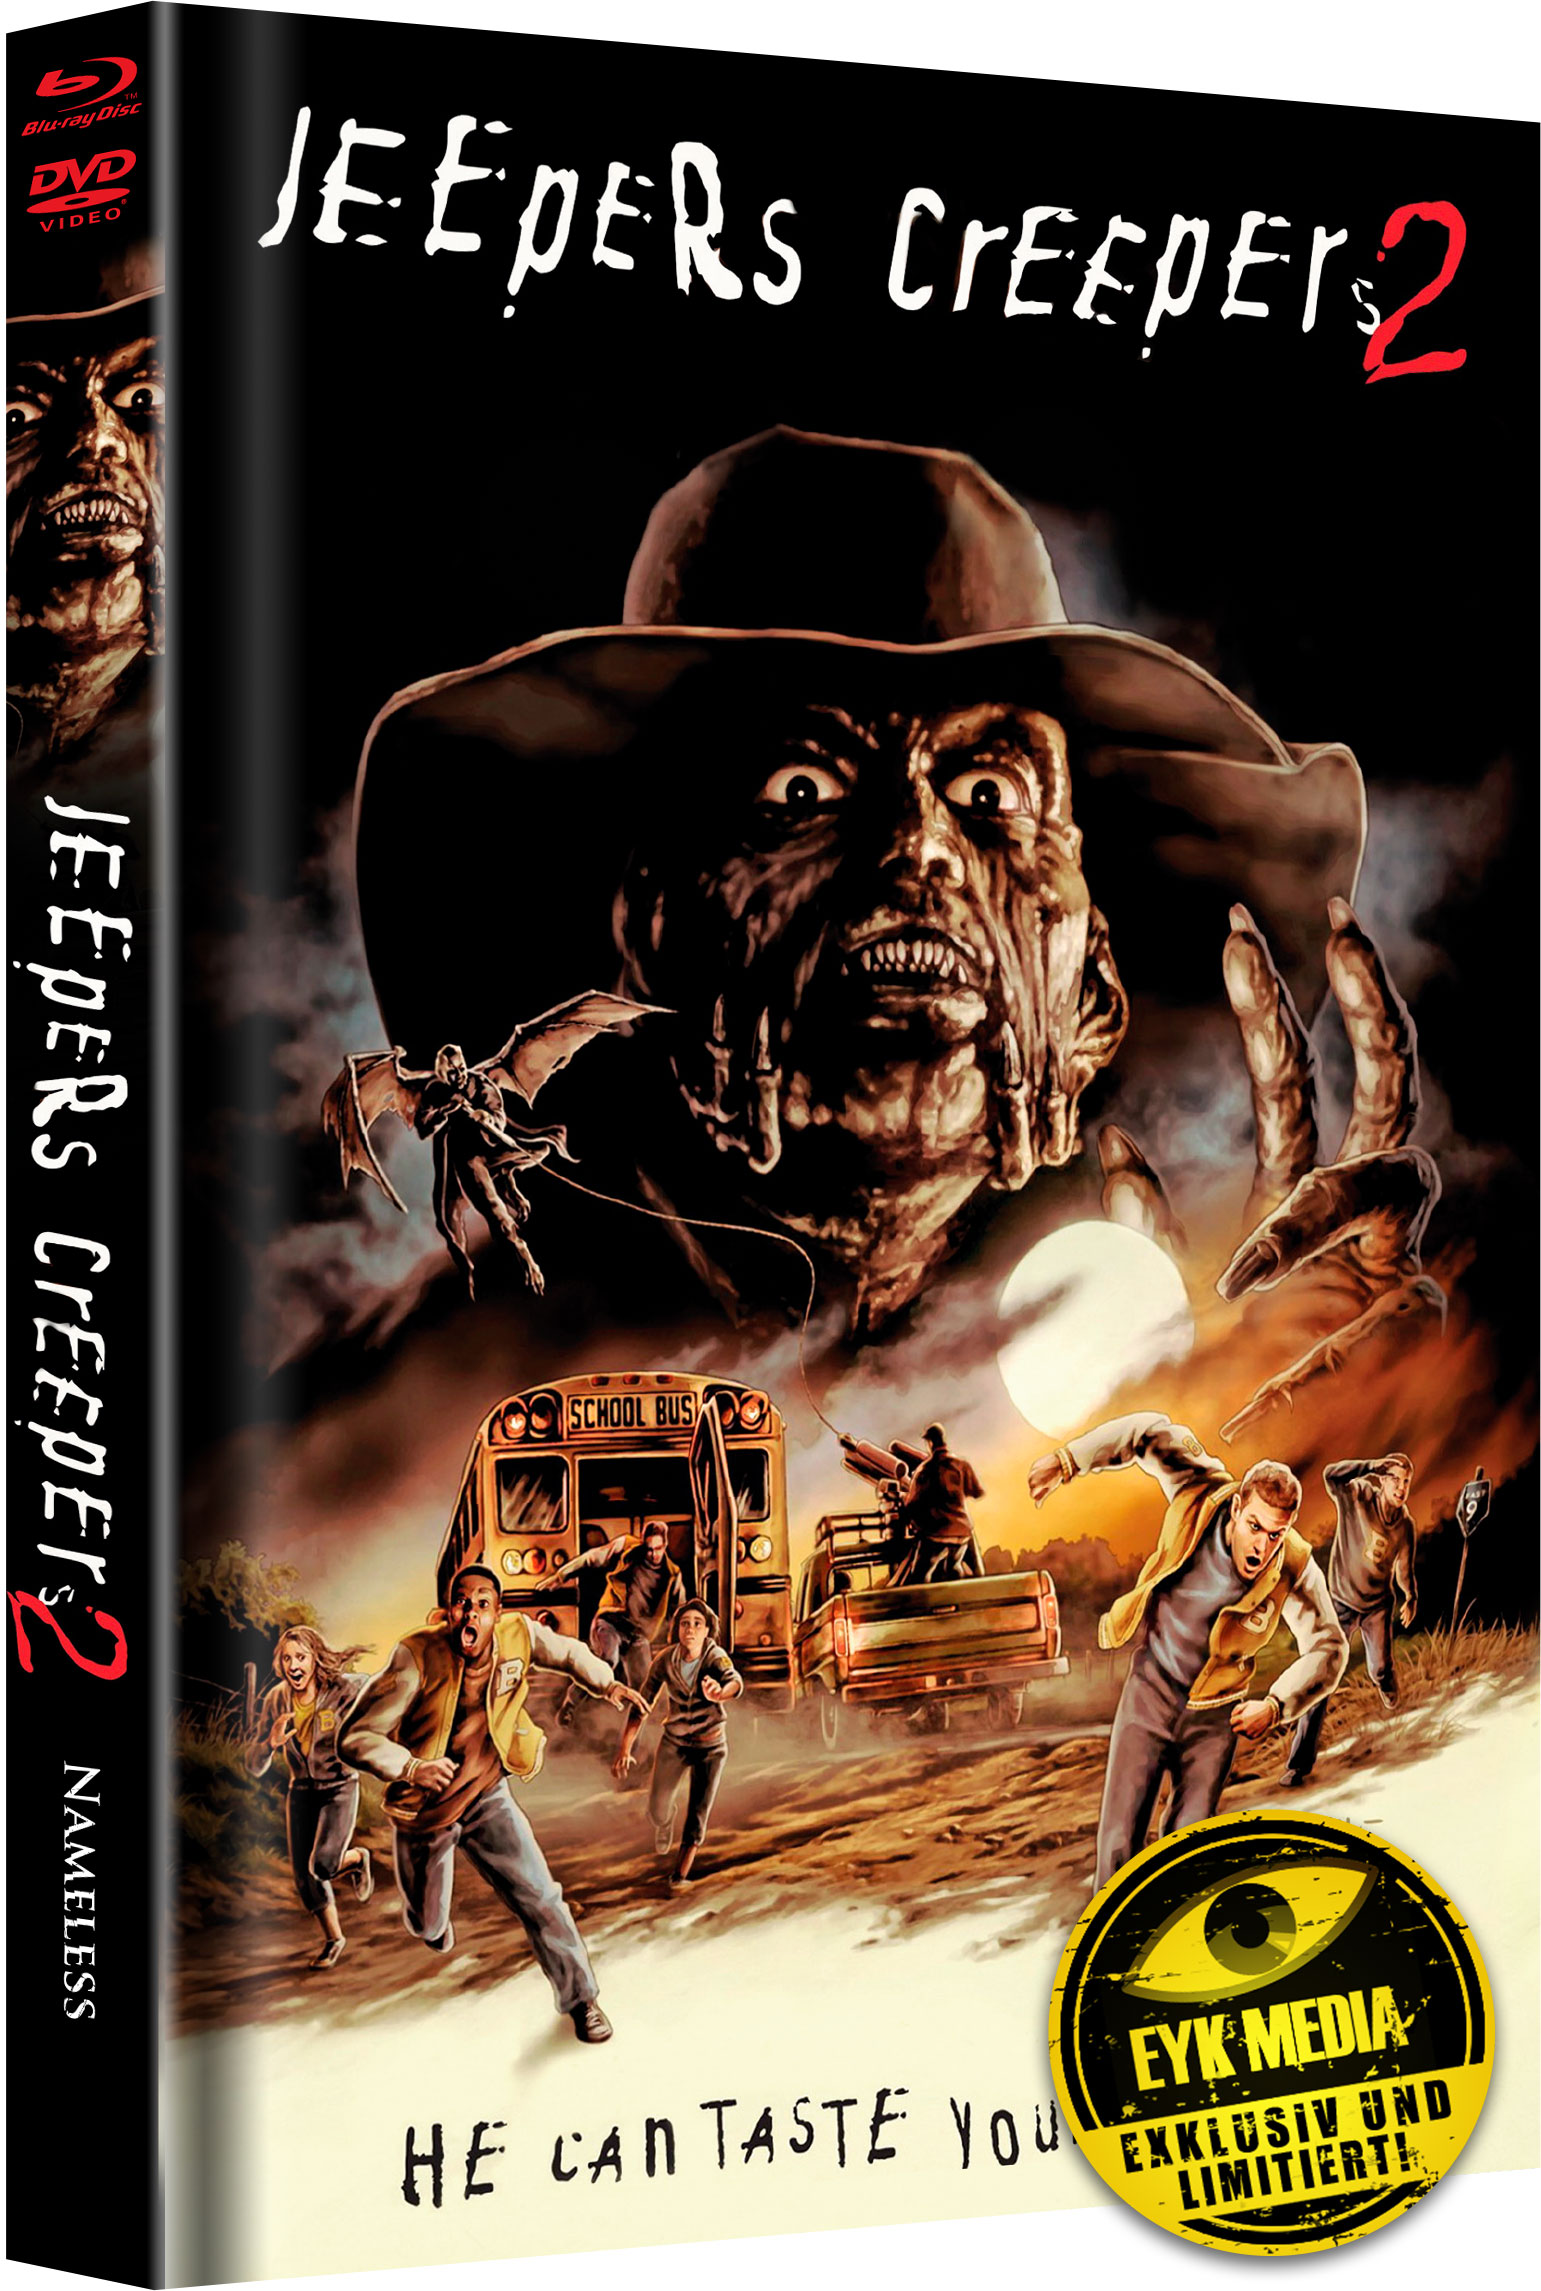 jeepers-creepers-2_mb-drawn_eyk2487.jpg